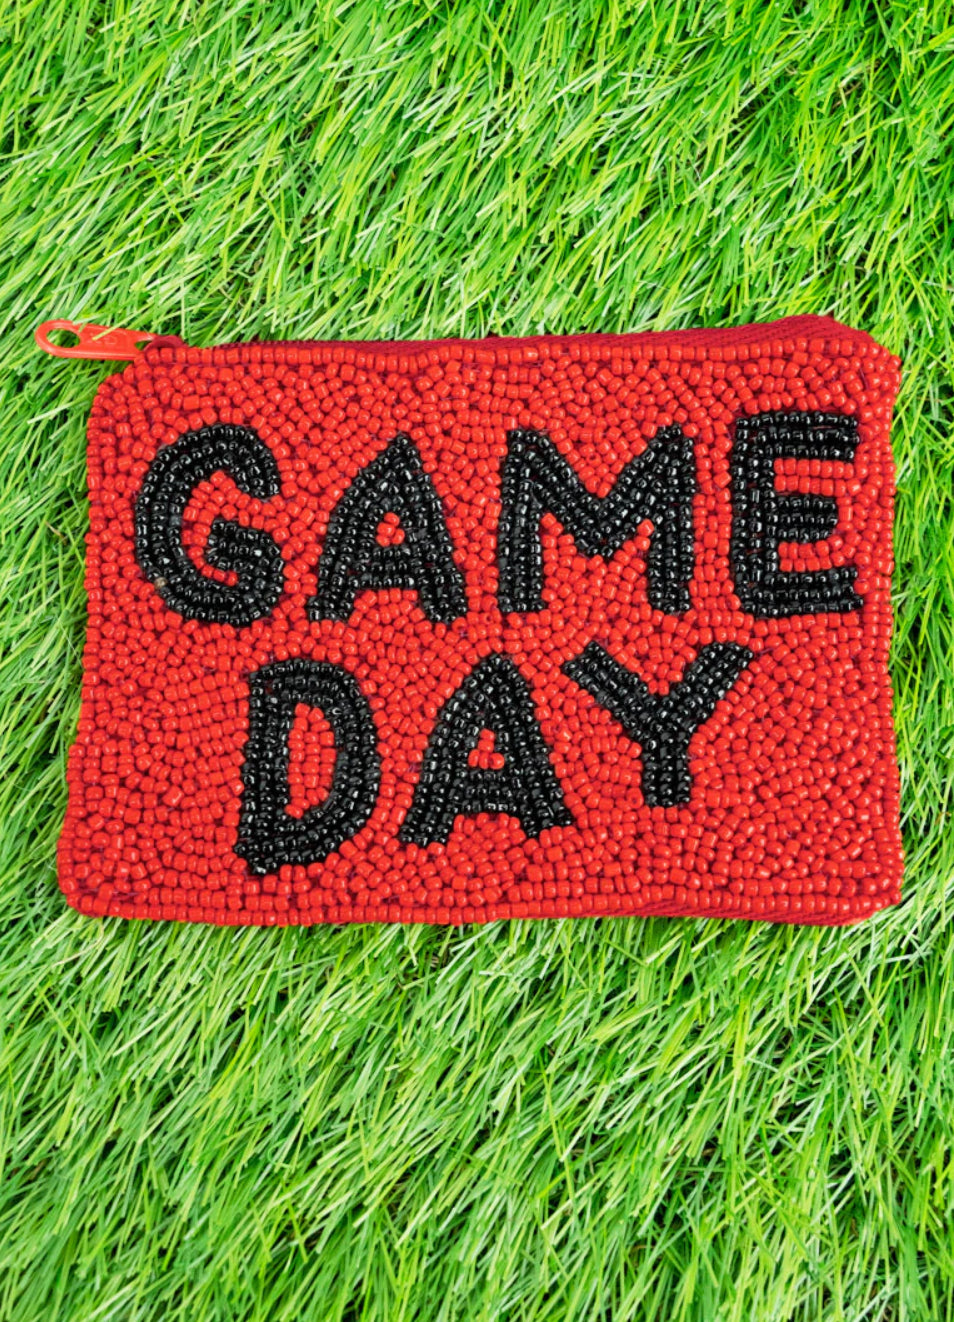 Beaded Game Day Clutches